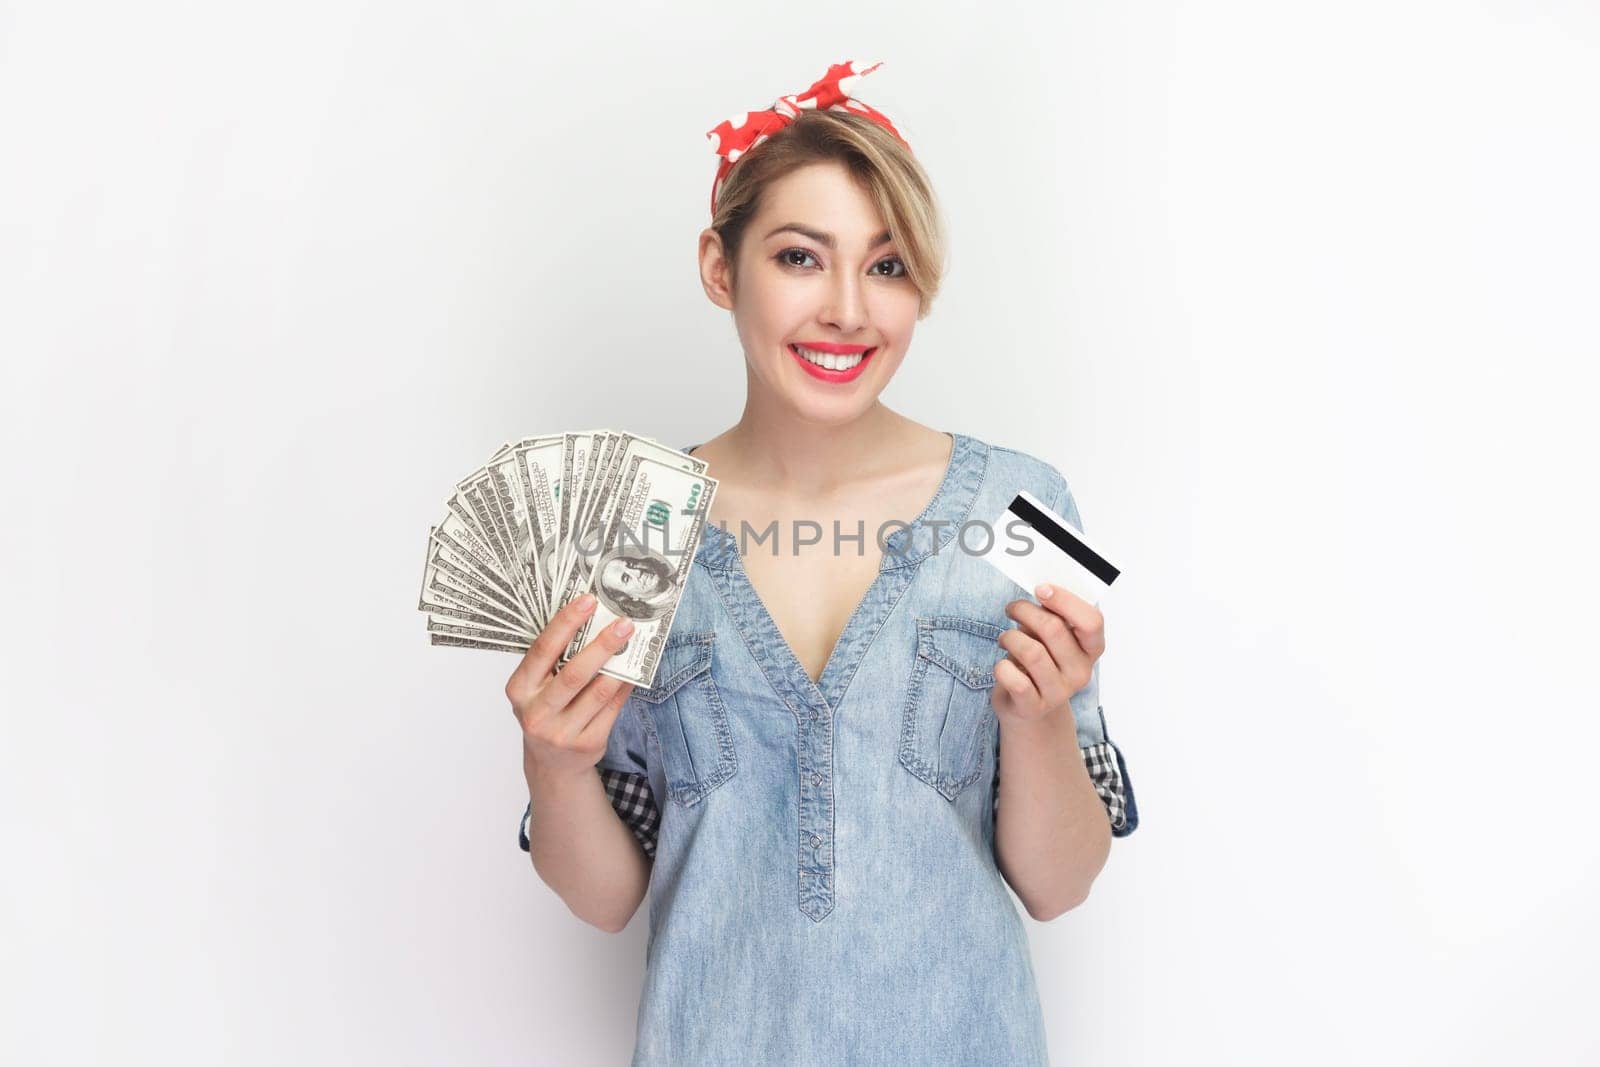 Portrait of smiling attractive cheerful blonde woman wearing blue denim shirt and red headband standing with credit card and dollar banknotes. Indoor studio shot isolated on gray background.